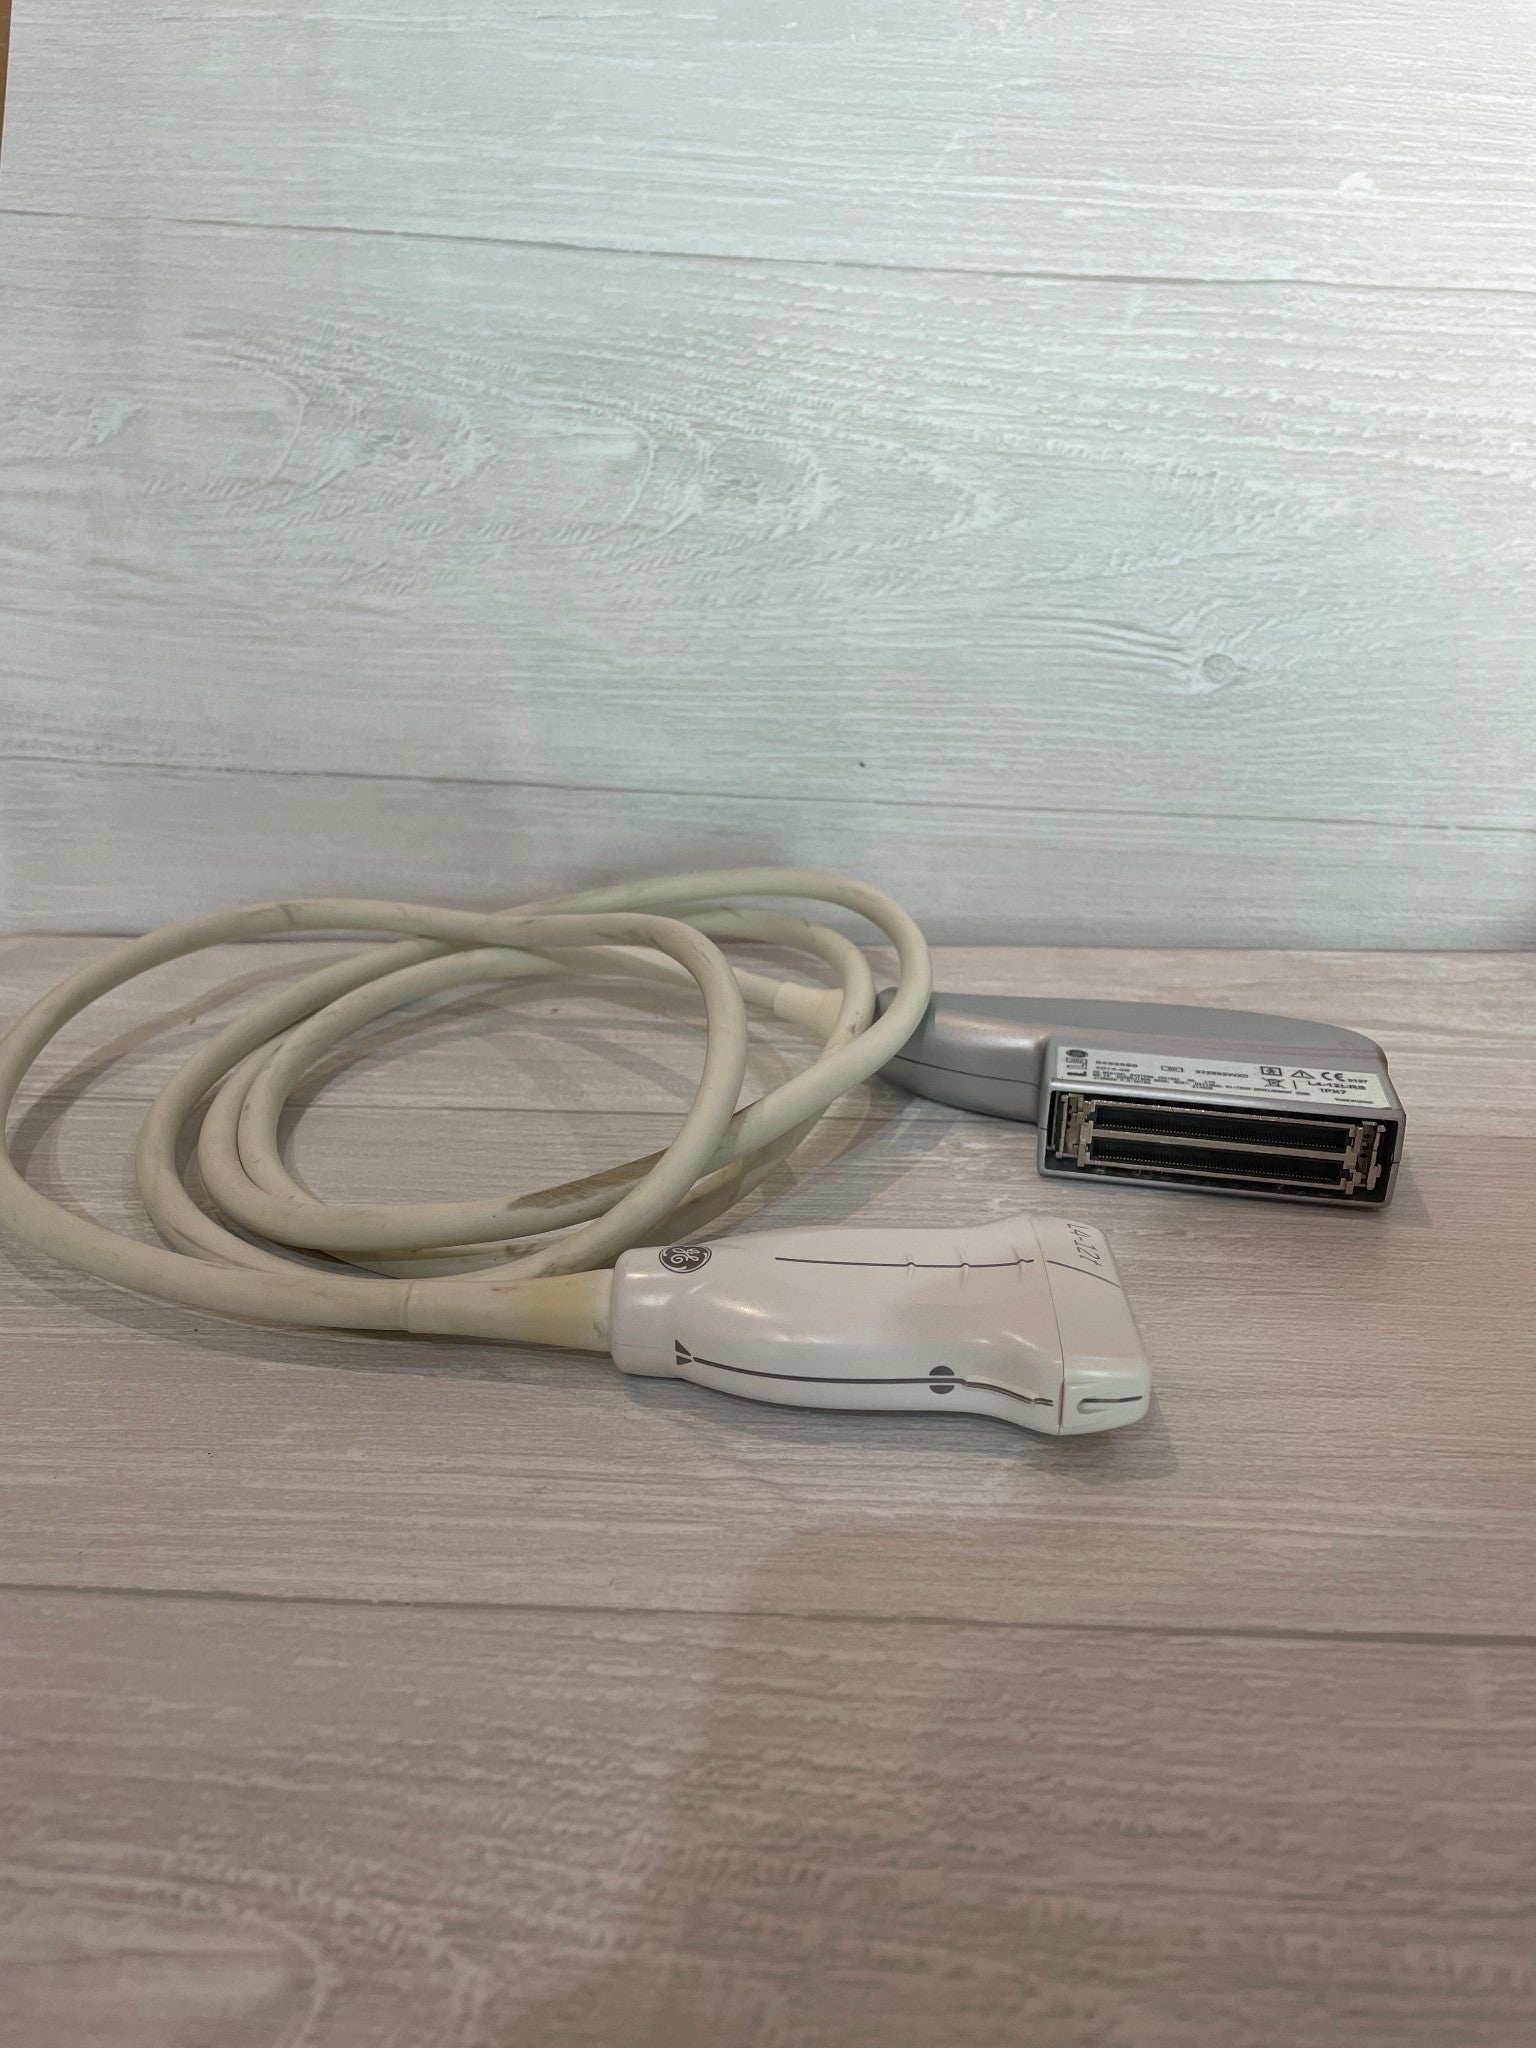 GE L4-12t-RS ULTRASOUND PROBE TRANSDUCER 2014 DIAGNOSTIC ULTRASOUND MACHINES FOR SALE